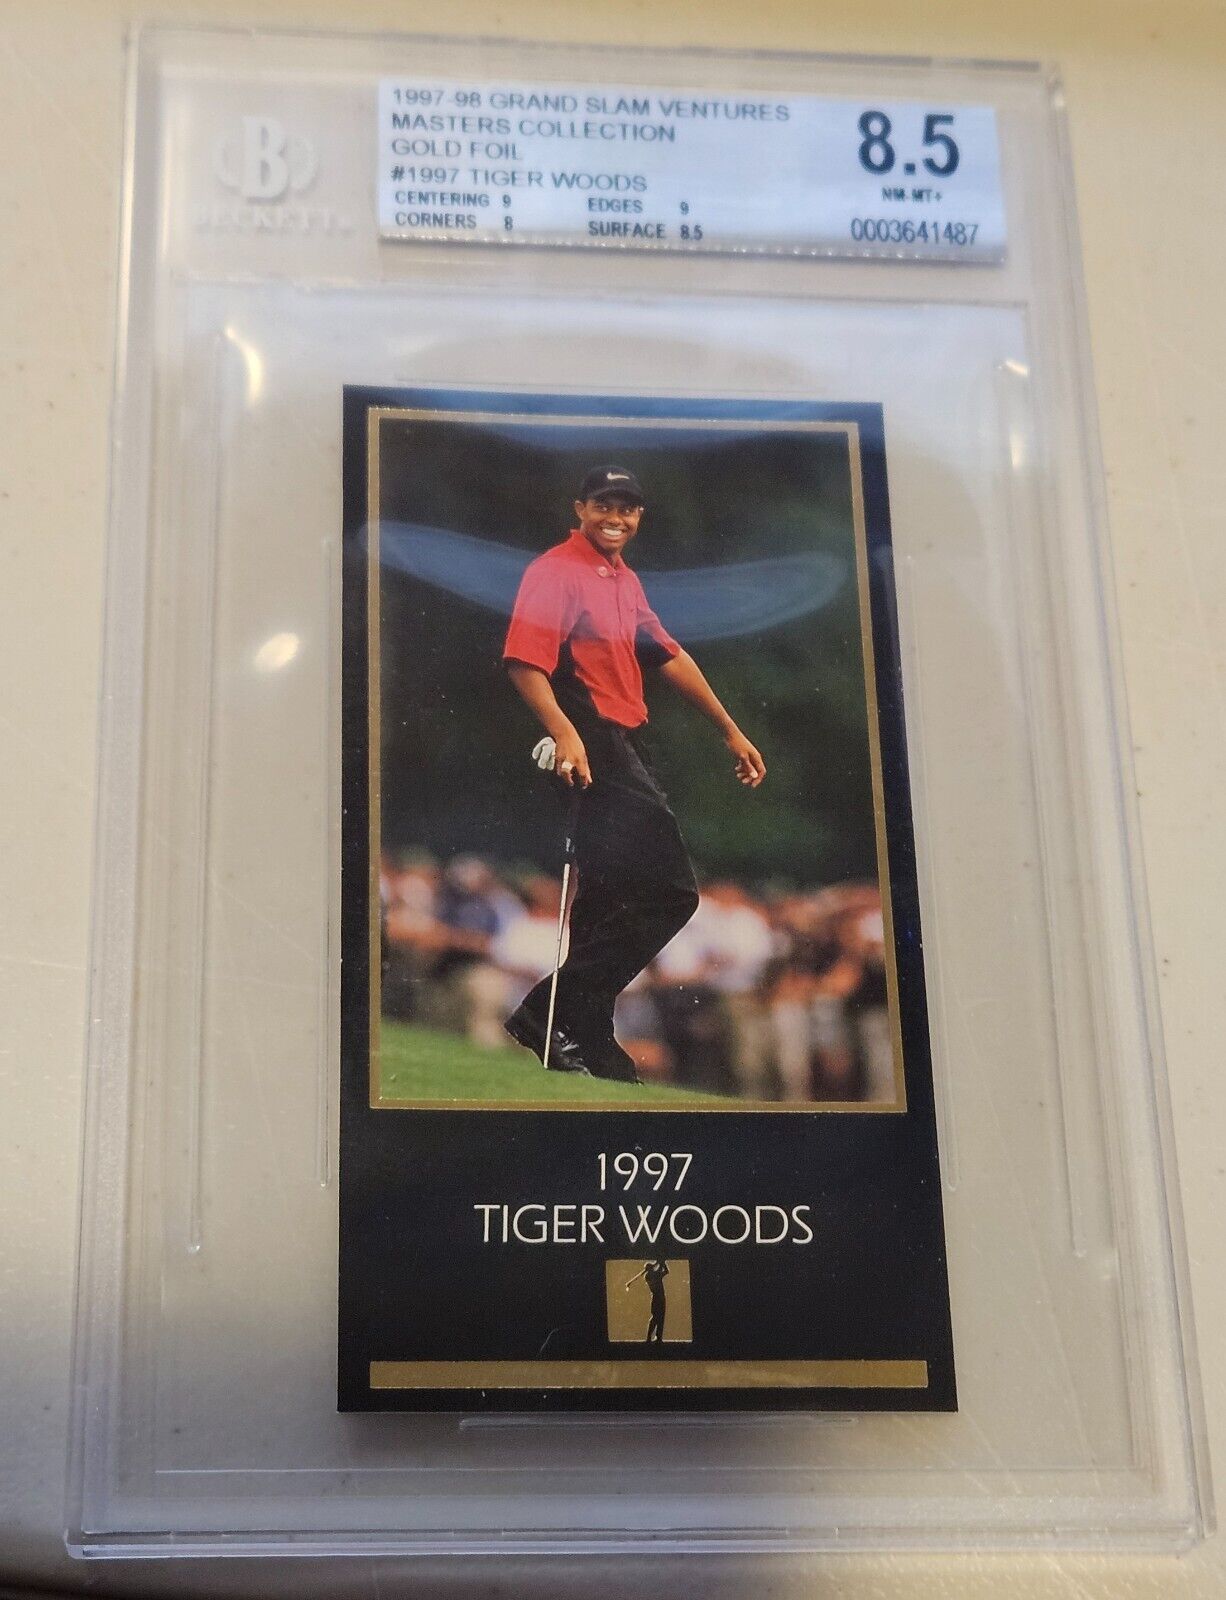 1997-98 TIGER WOODS GOLD FOIL MASTERS COLLECTION BGS 8.5 RARE GOLD VERSION